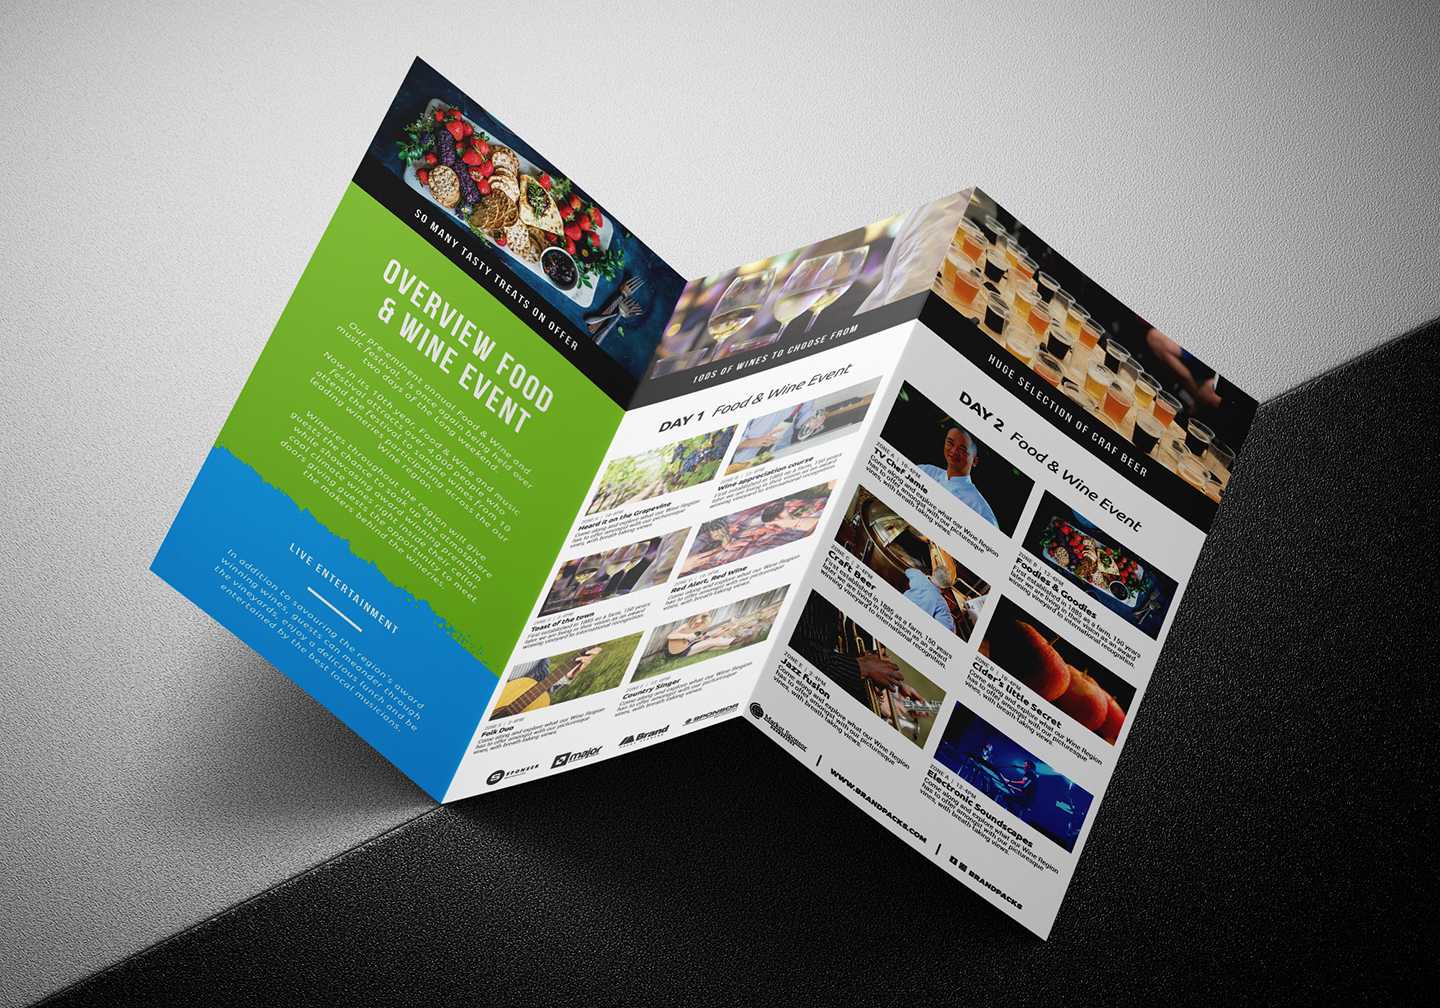 Free Tri Fold Brochure Template For Events & Festivals – Psd With Membership Brochure Template